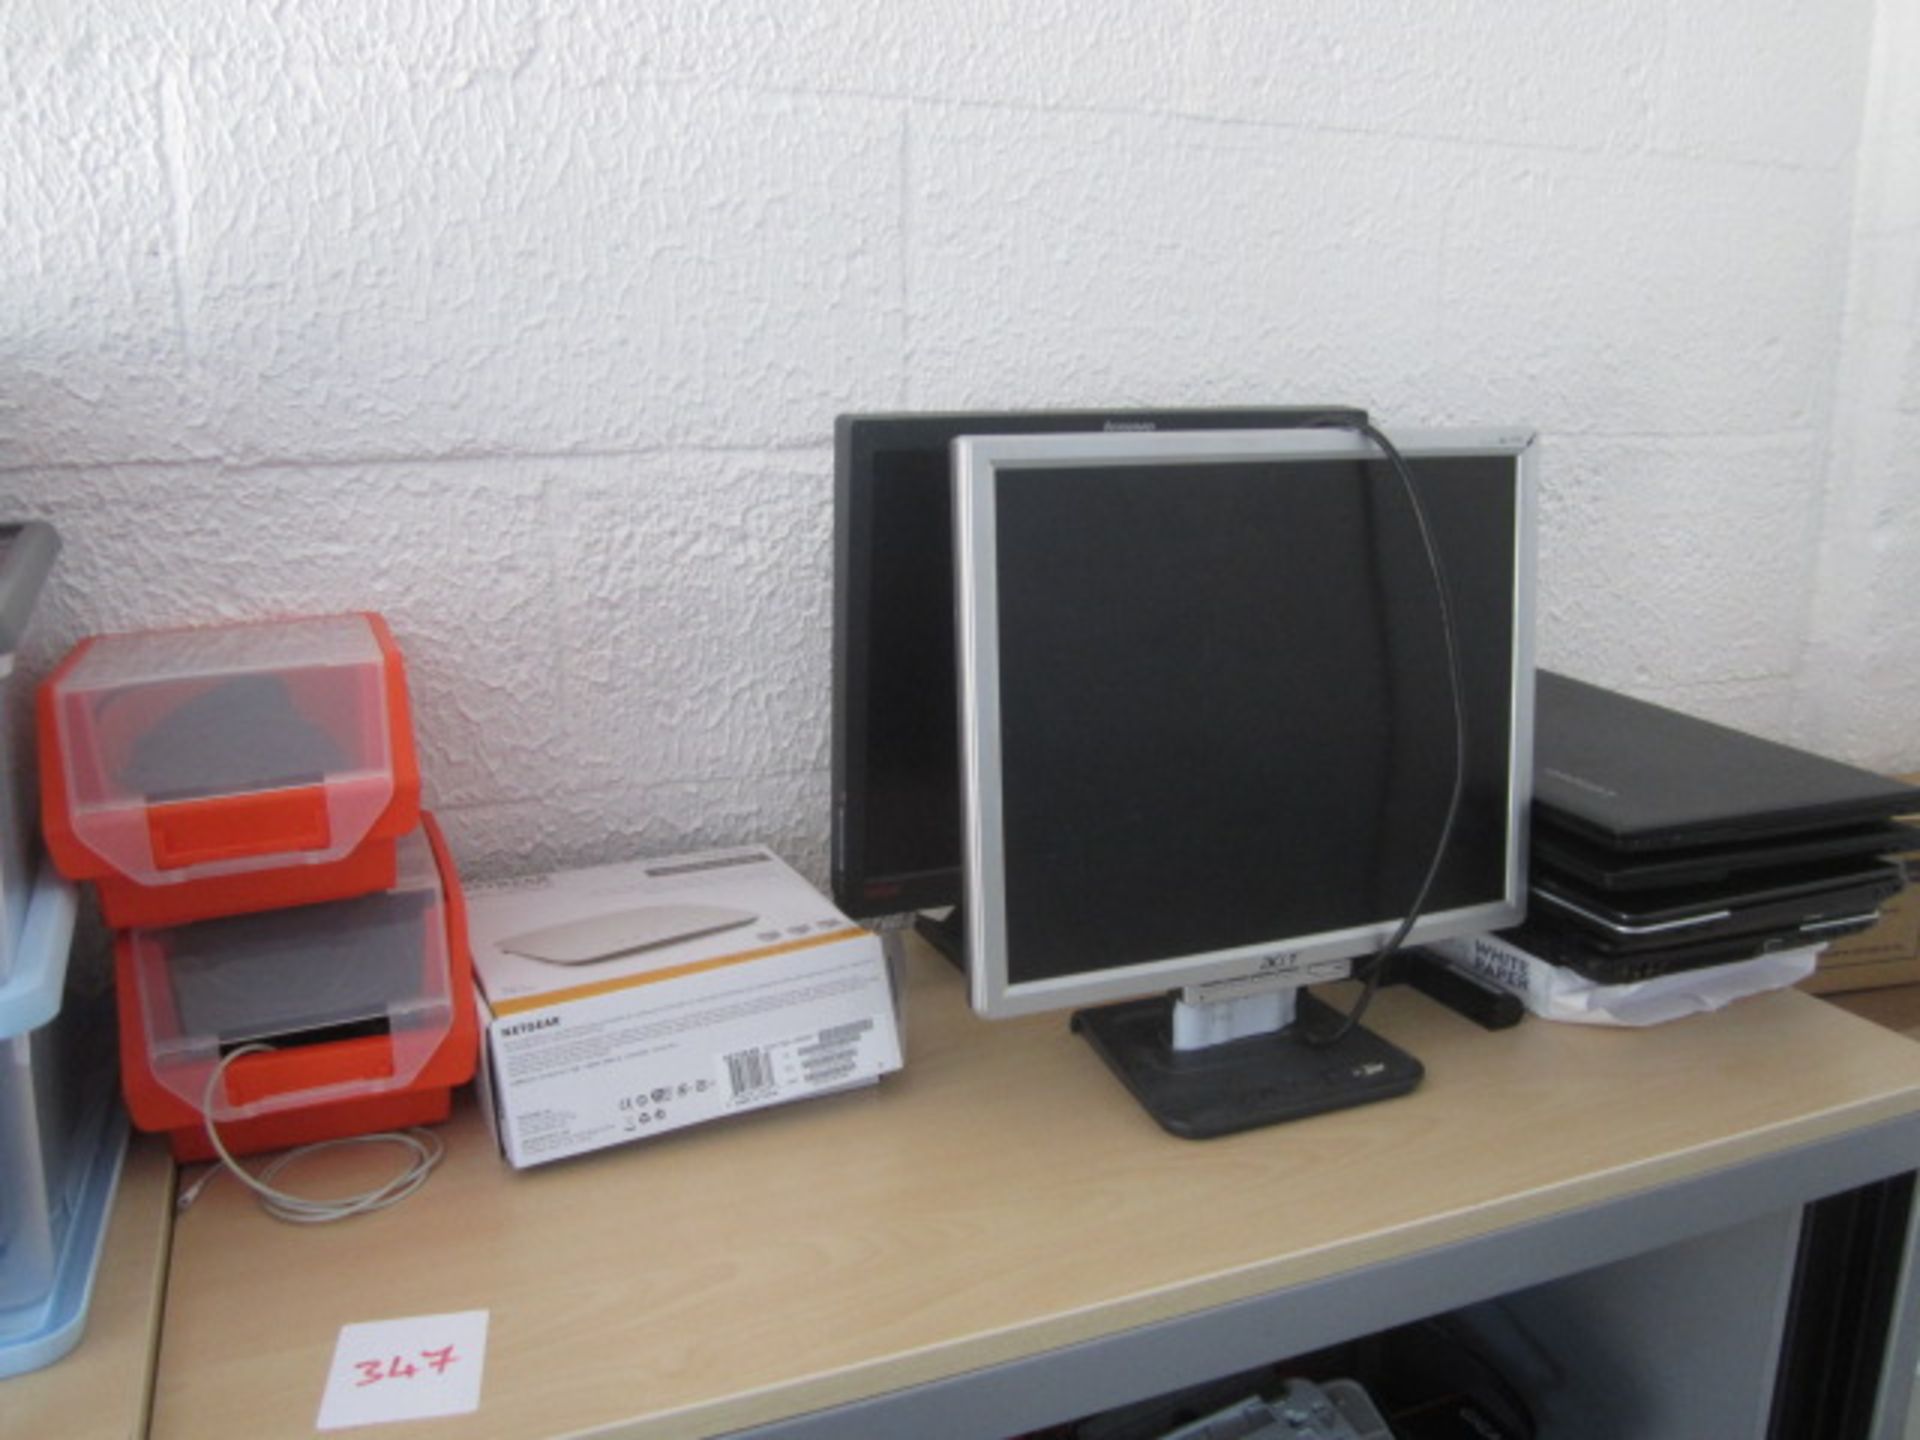 Remaining loose contents of IT equipment including 16 x assorted laptop - spares or repairs, X-VGA - Image 2 of 8